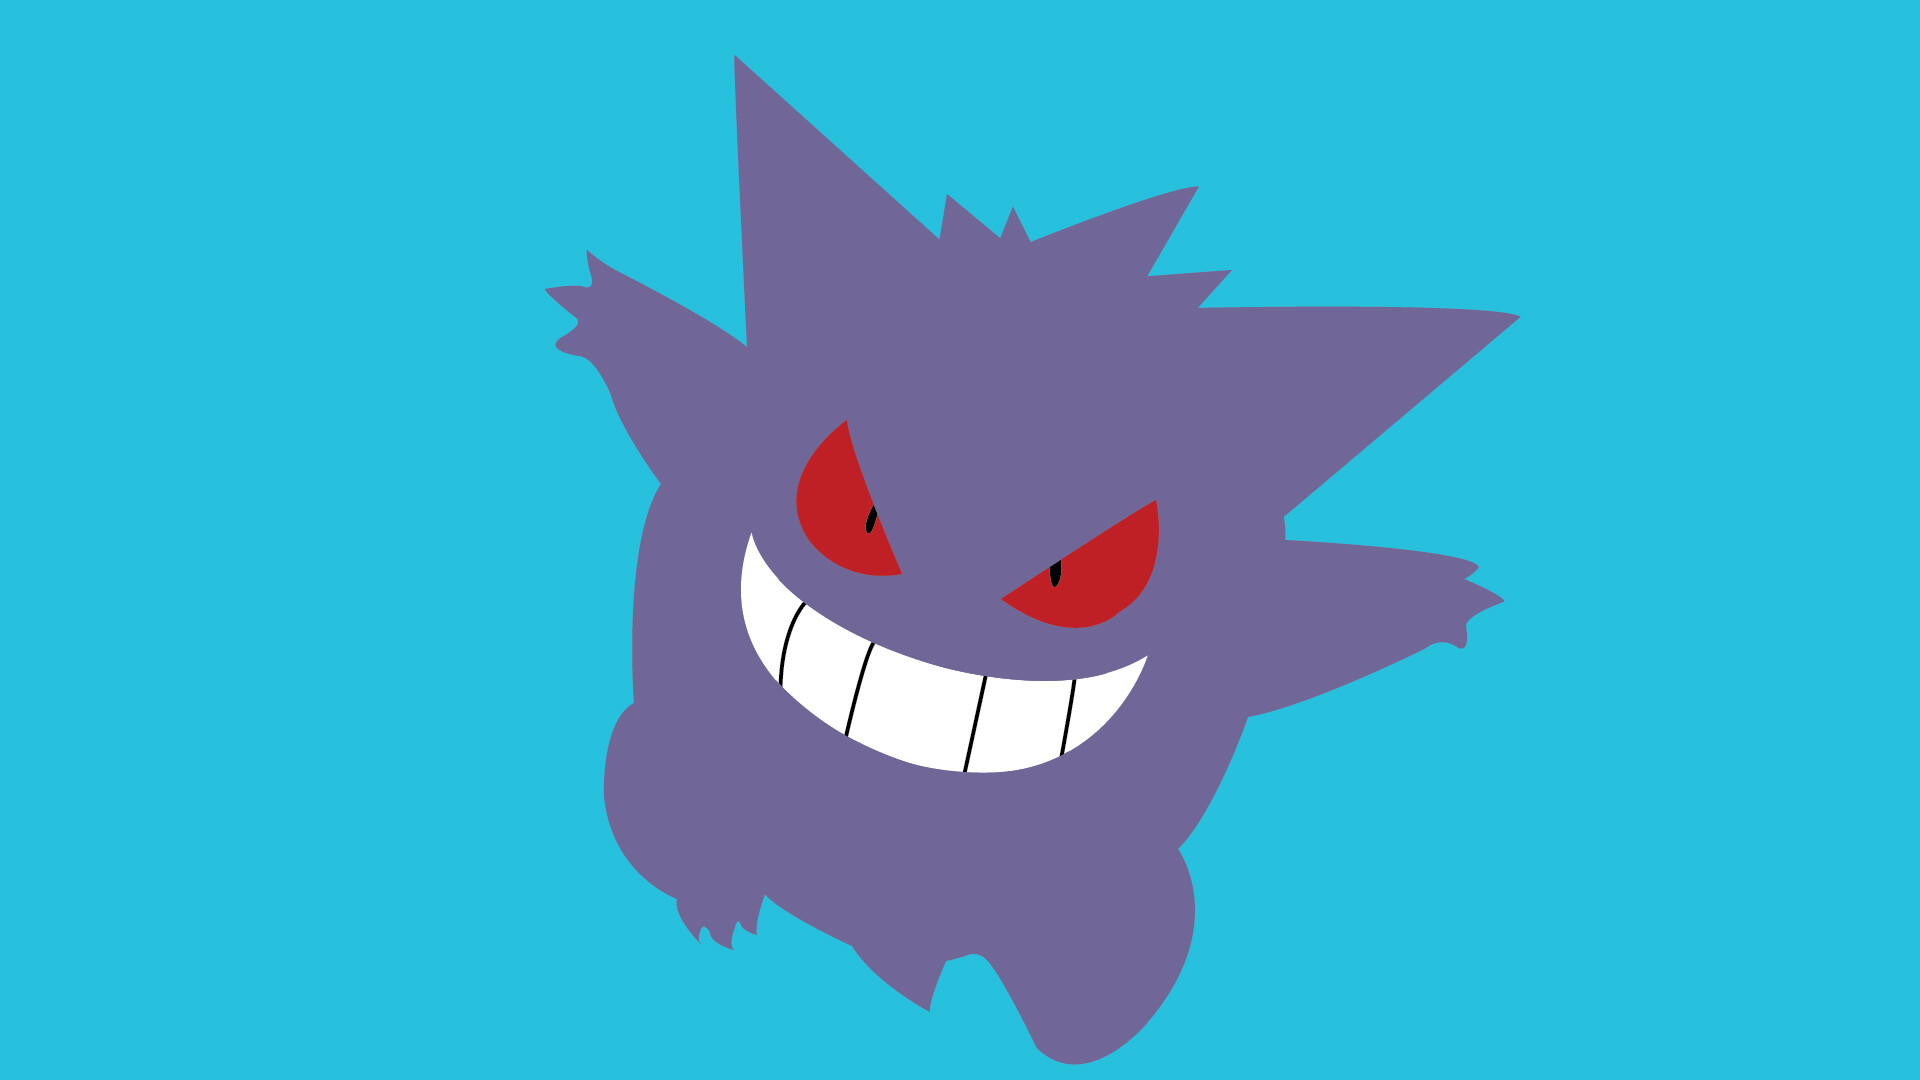 Gengar: Red eyes, Gastly family, A Pokémon species in Nintendo and Game Freak's Pokemon franchise. 1920x1080 Full HD Wallpaper.